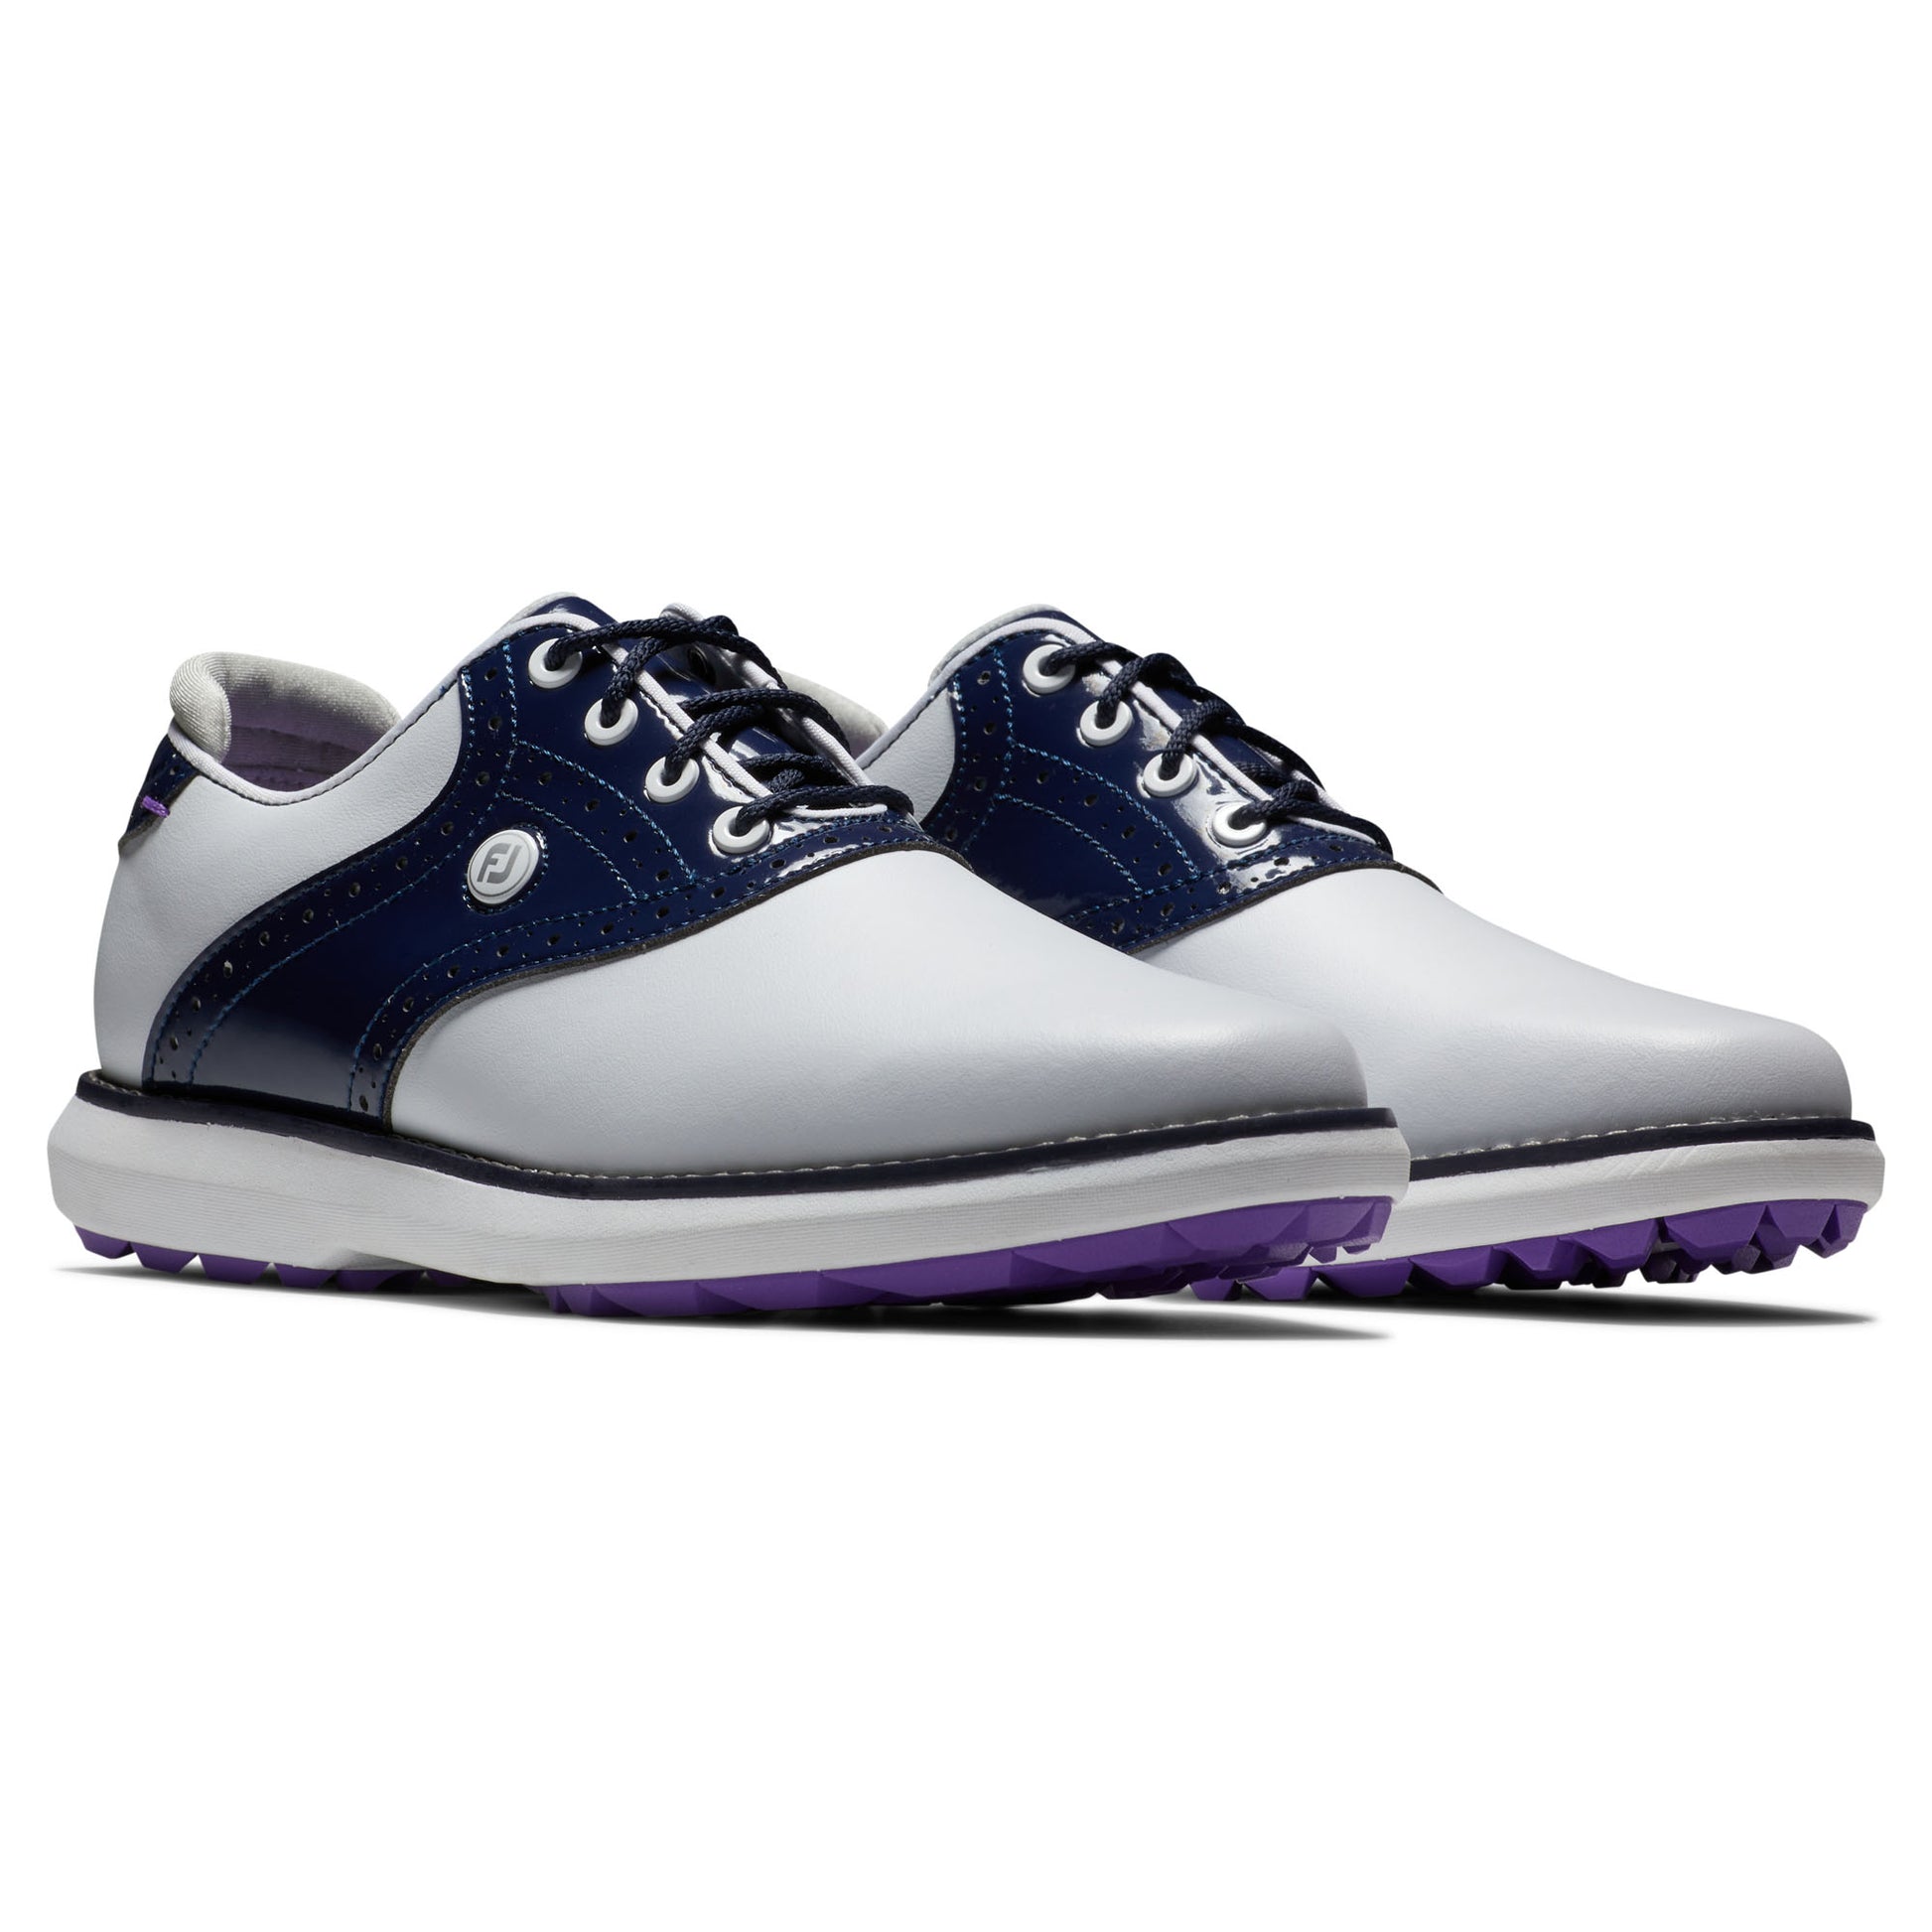 FootJoy Ladies Wide Fit Waterproof Spikeless Traditions Shoes in White, Navy & Purple